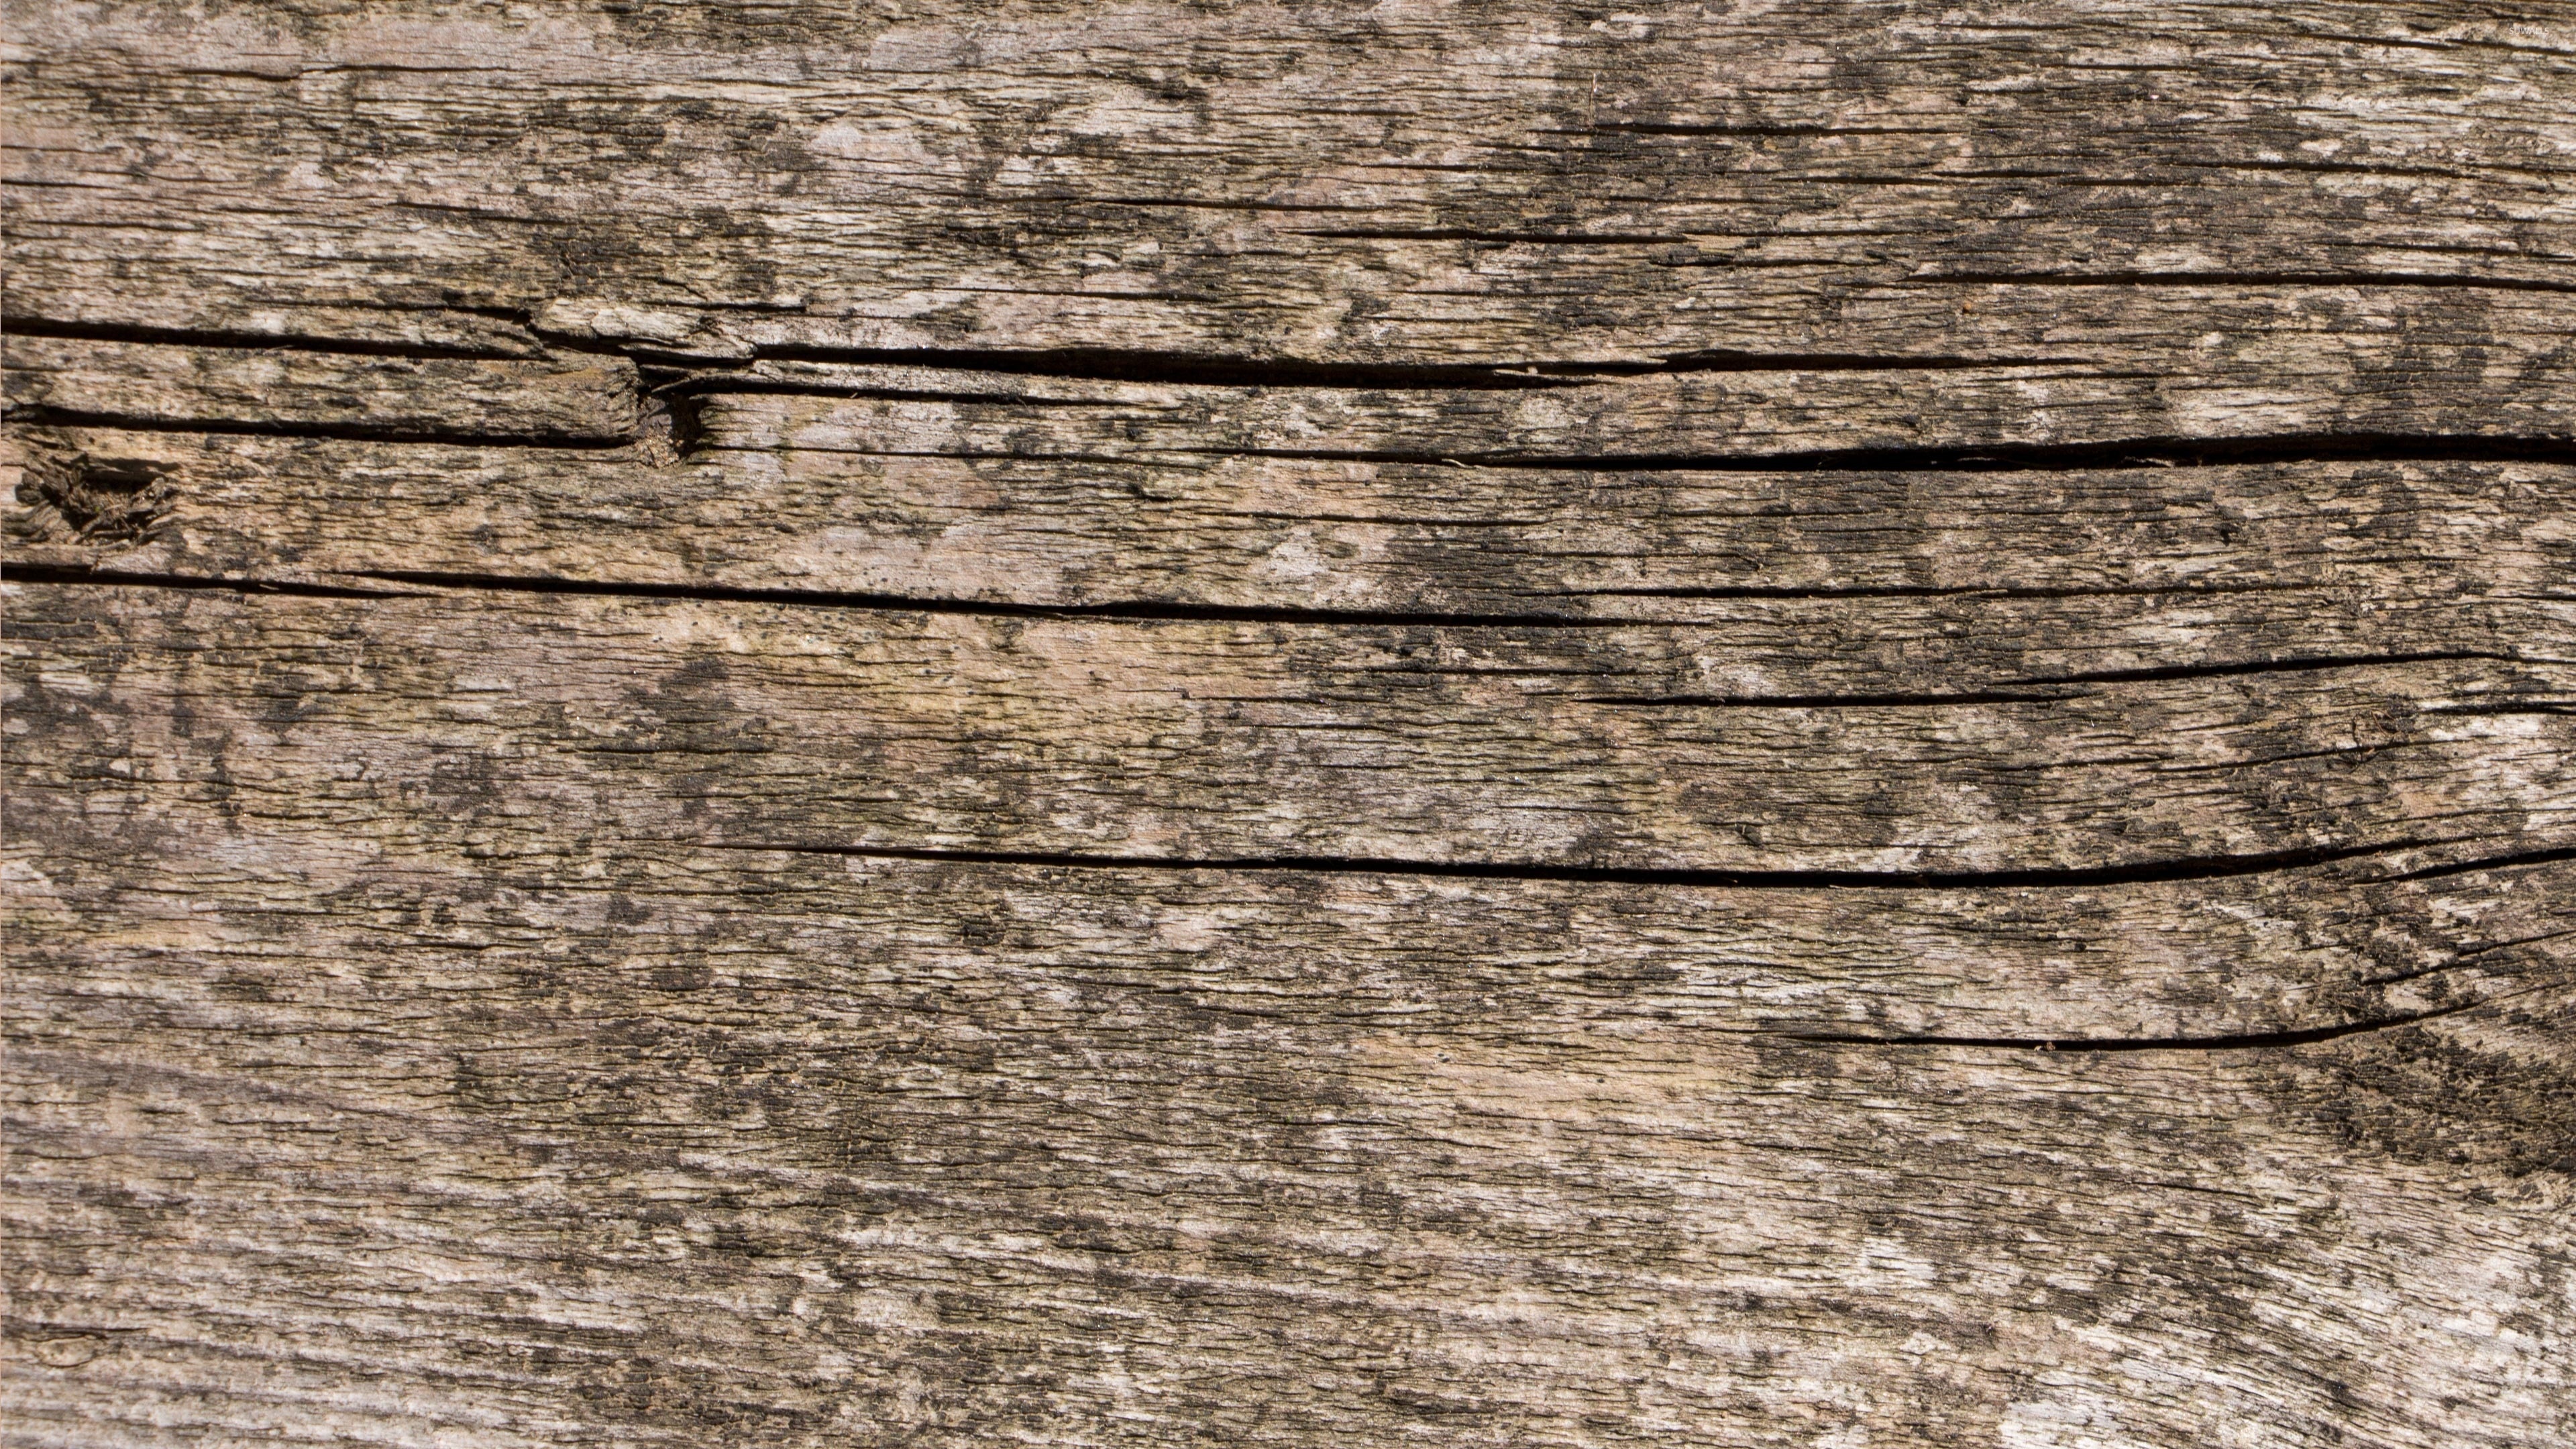 Cracked old wood wallpaper, Weathered beauty, Vintage charm, Photography wallpapers, 3840x2160 4K Desktop